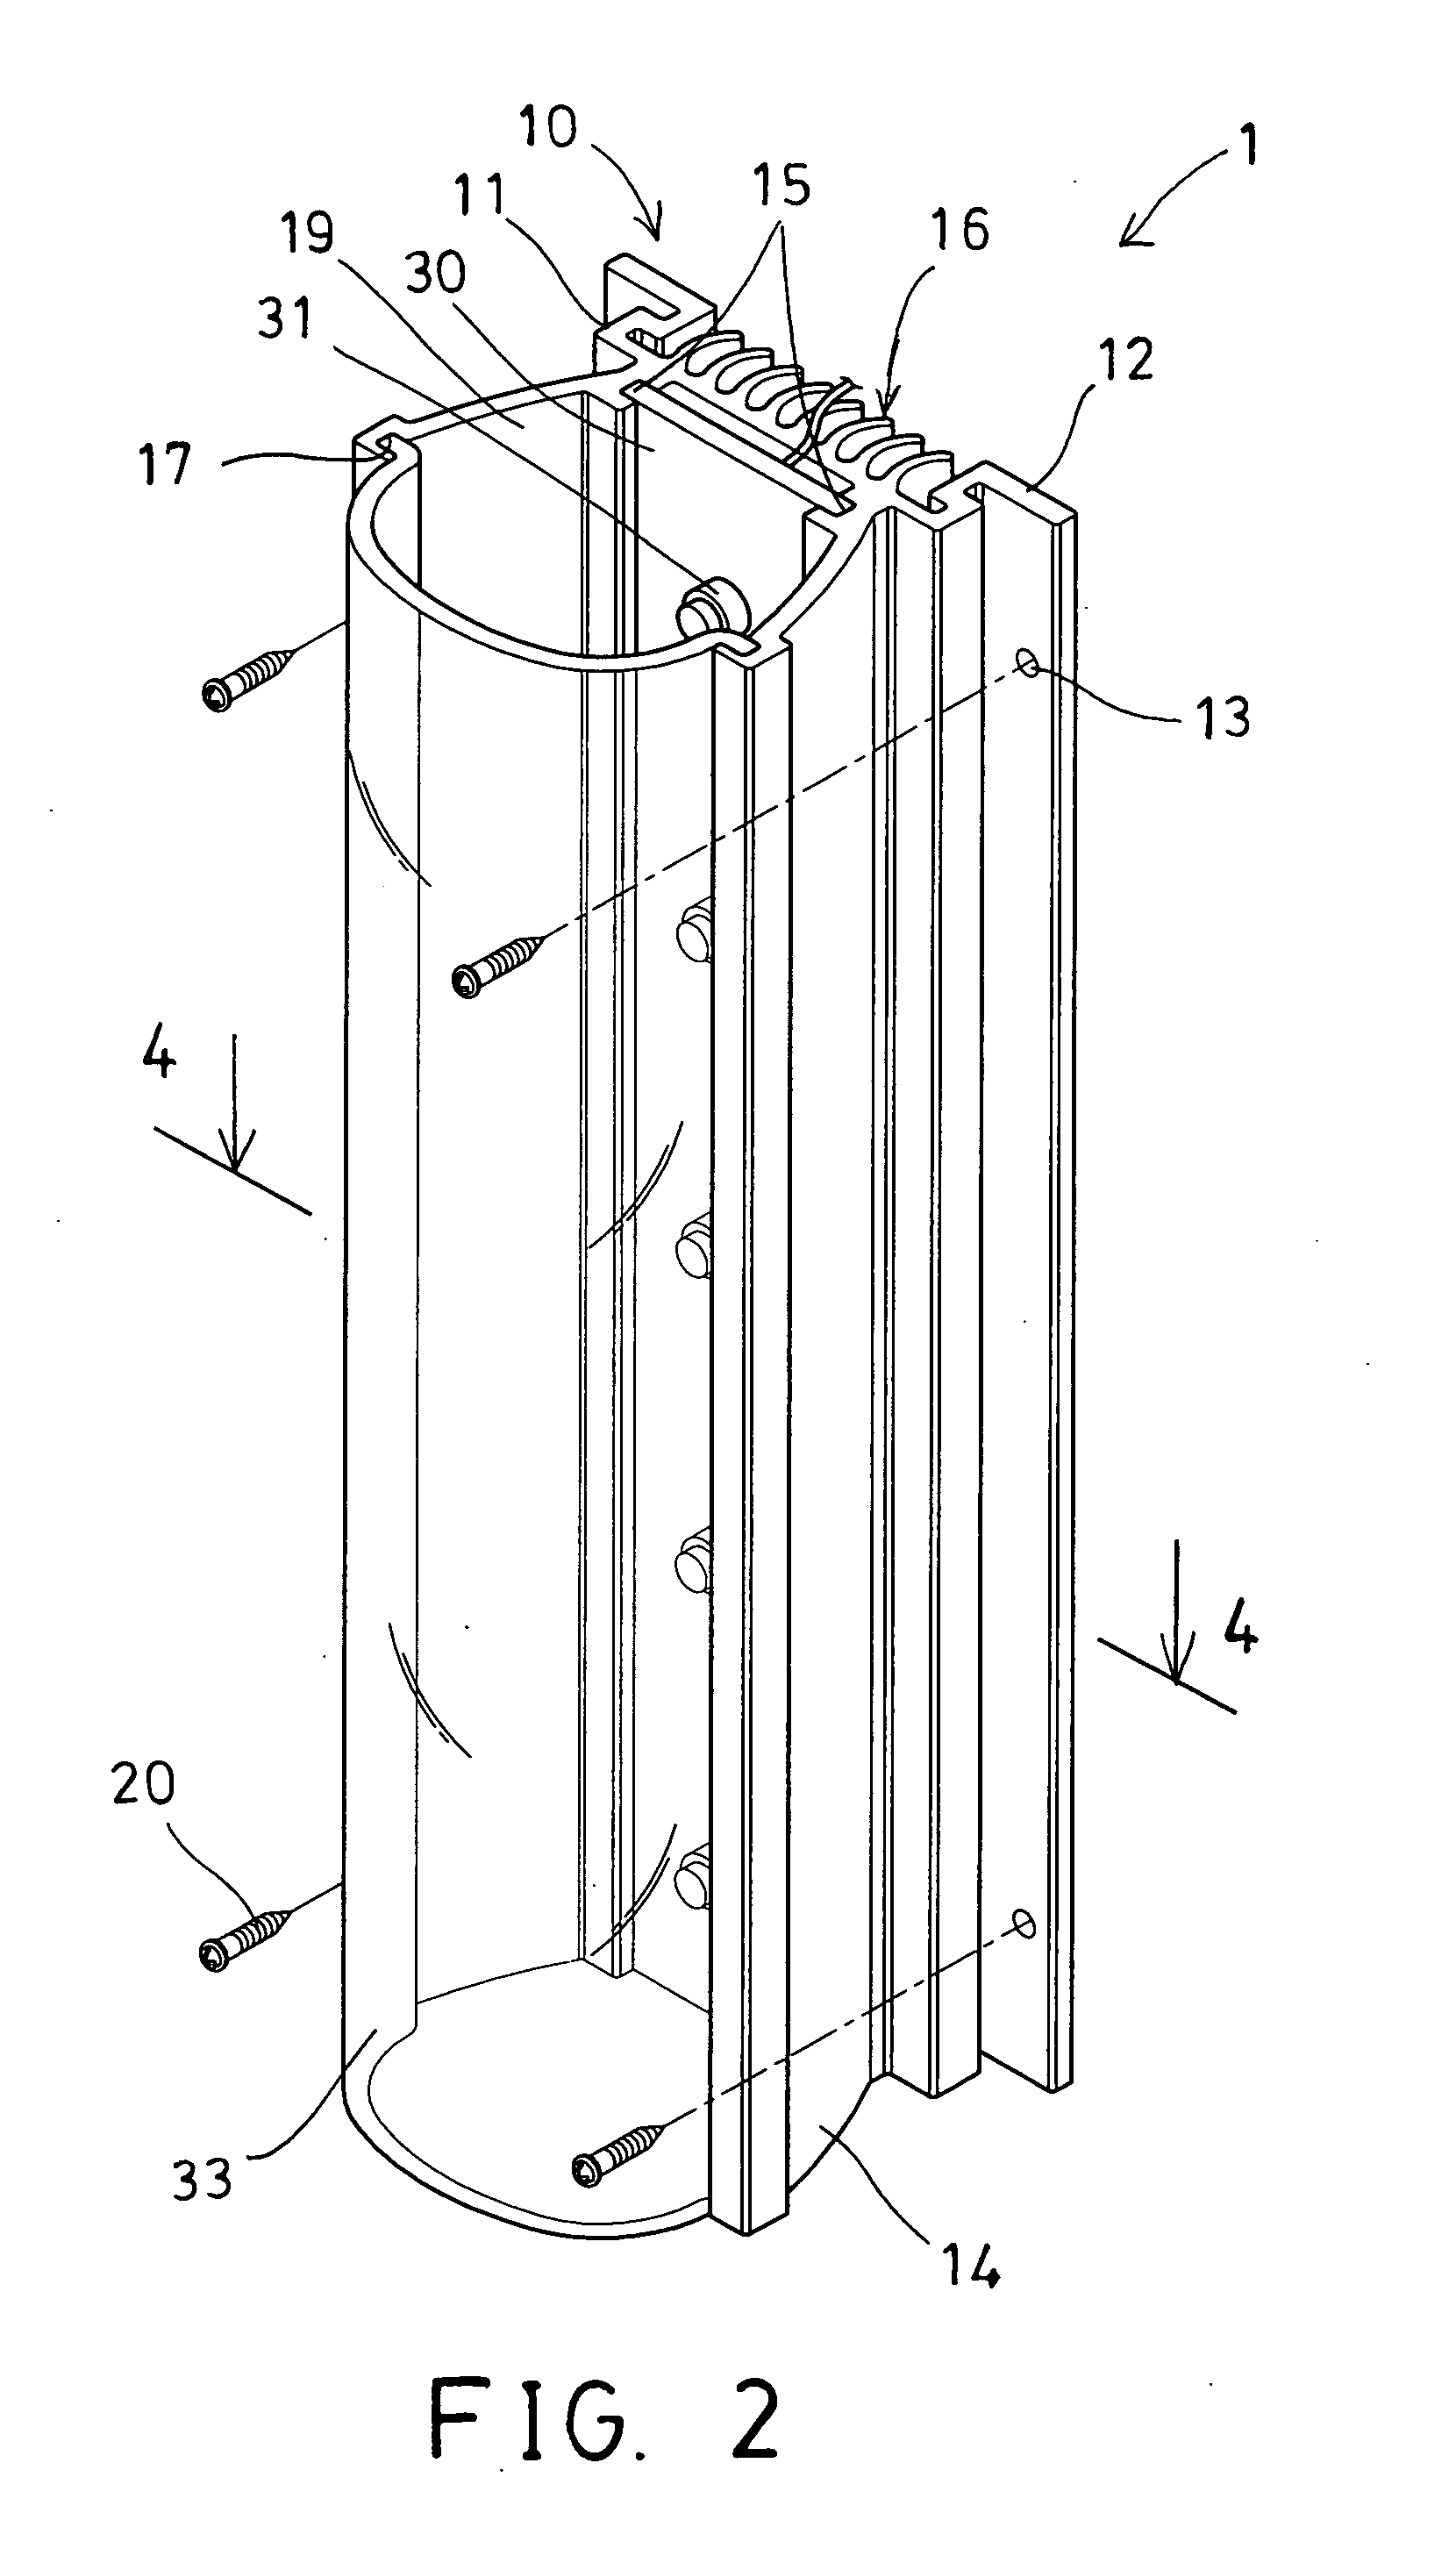 LED light device having heat dissipating structure